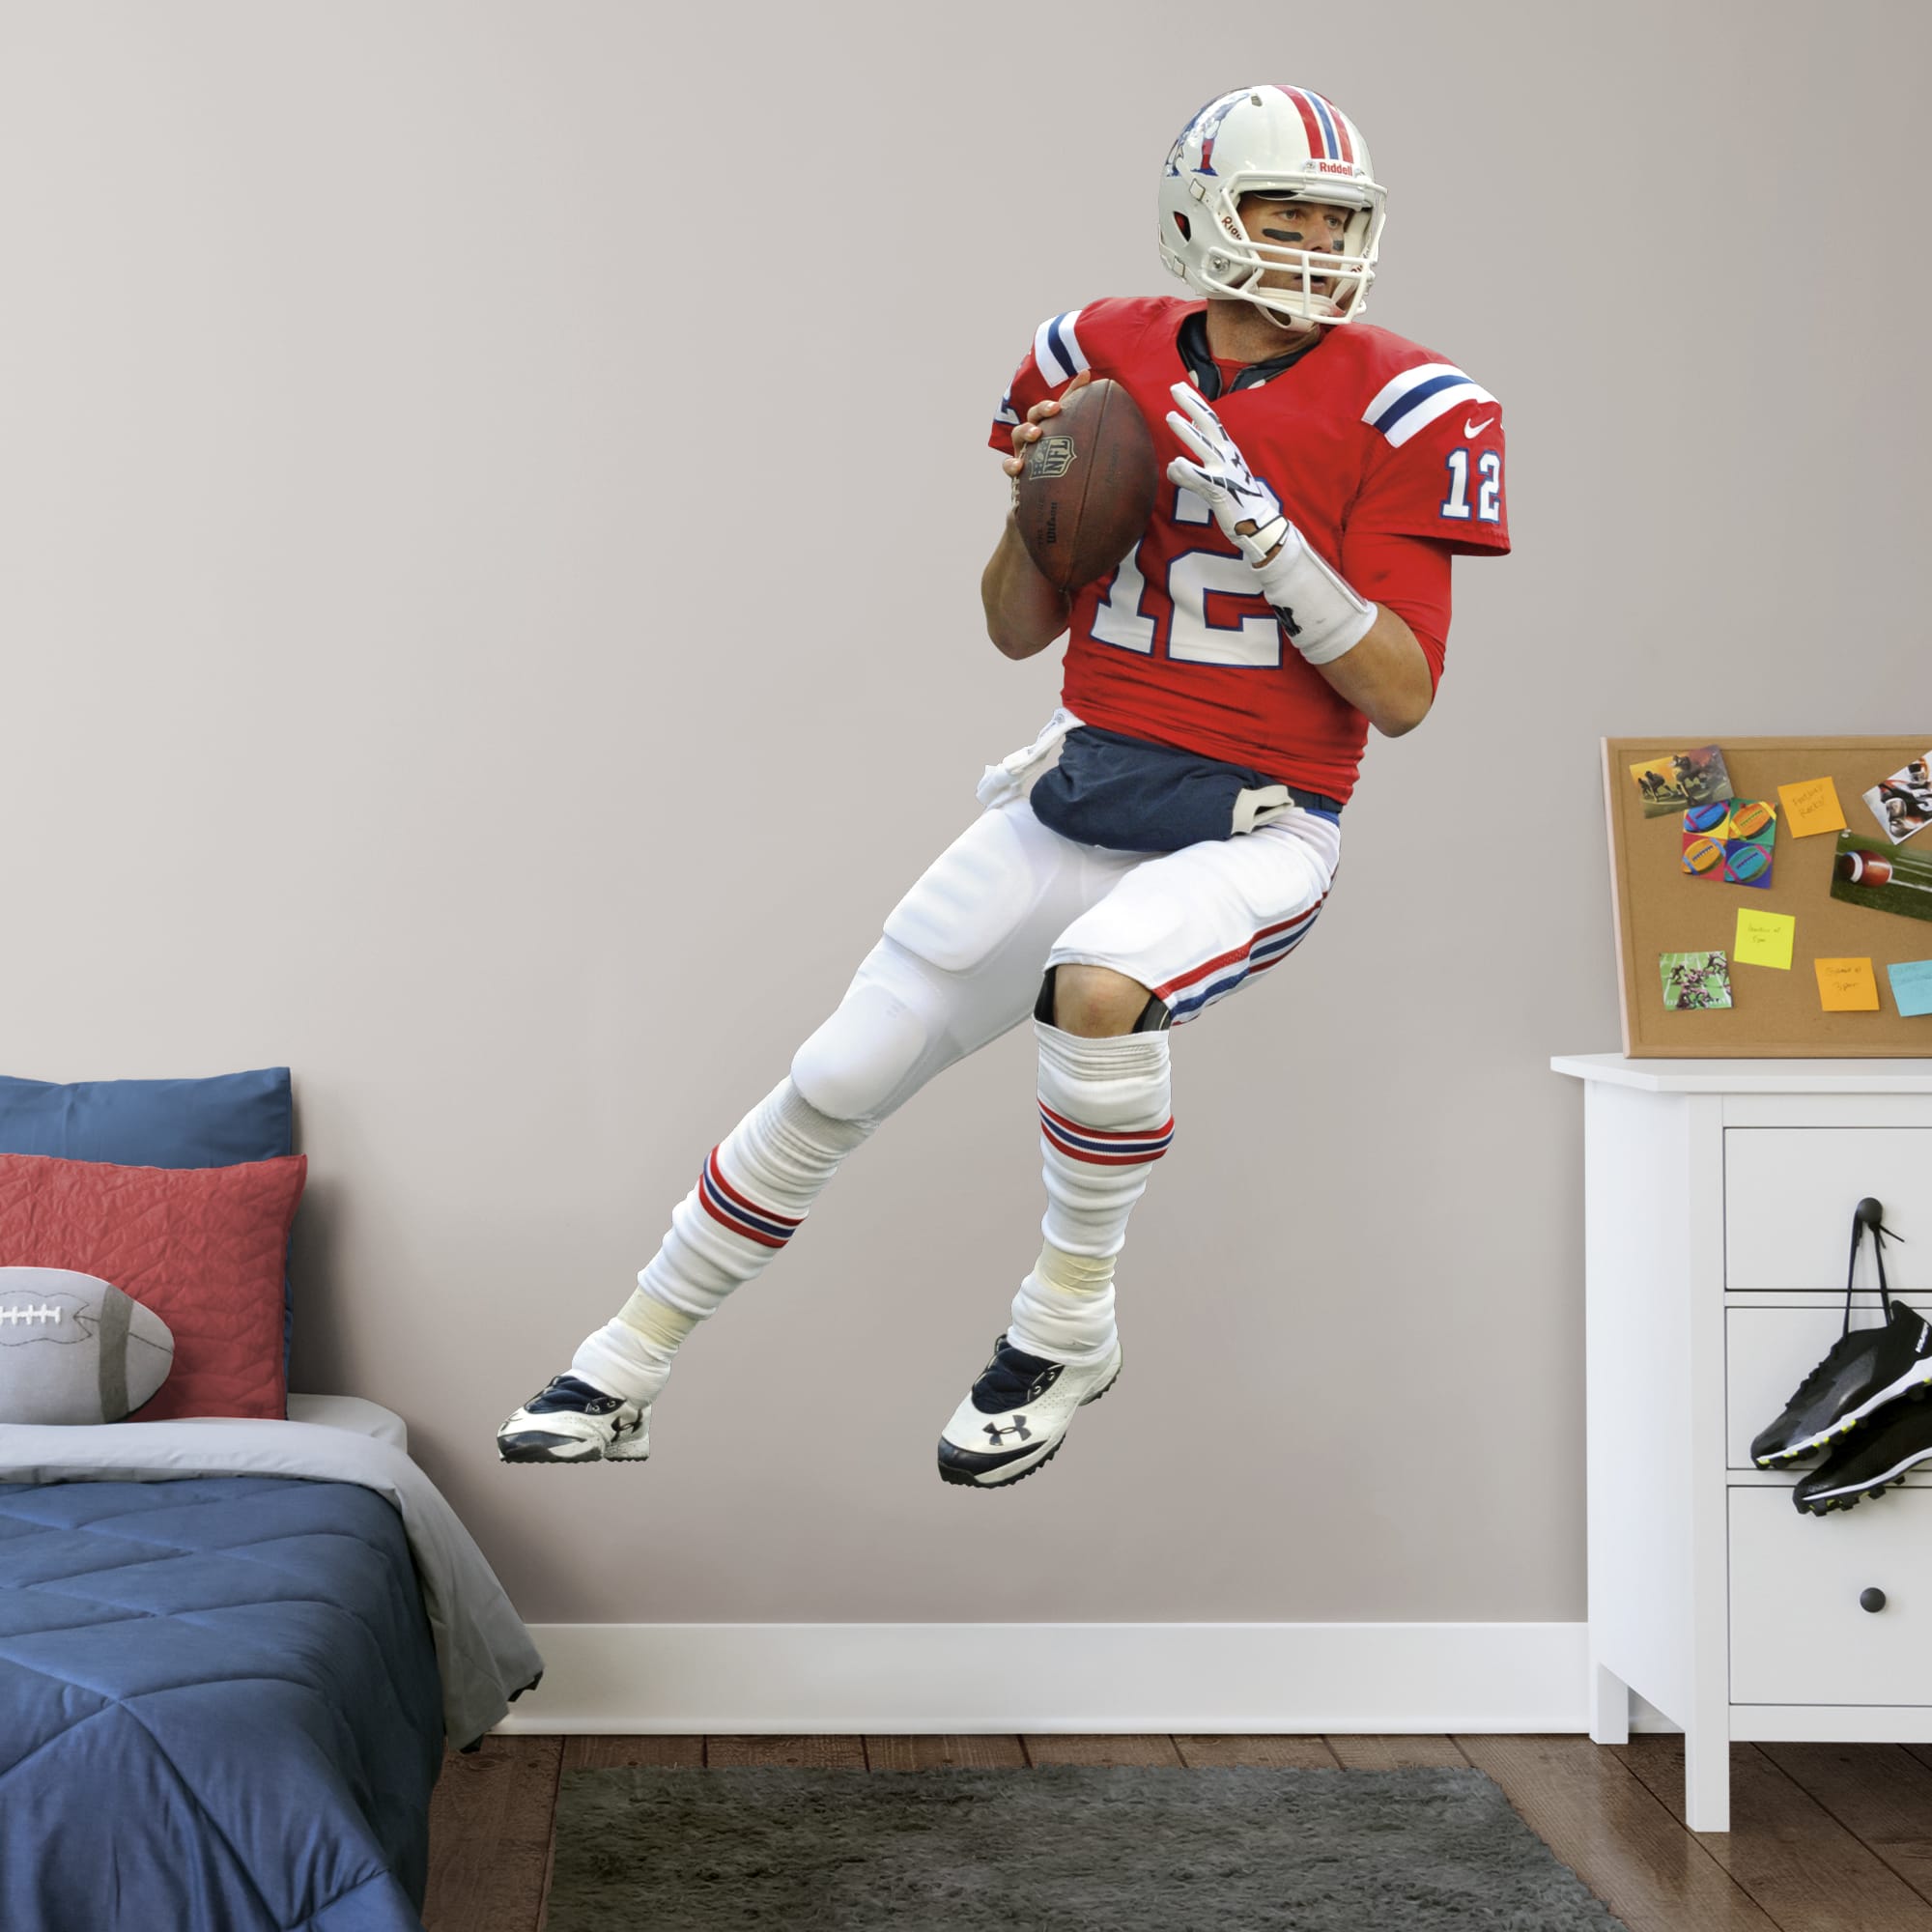 Tom Brady for New England Patriots: Throwback - Officially Licensed NFL Removable Wall Decal 55.0"W x 76.0"H by Fathead | Vinyl